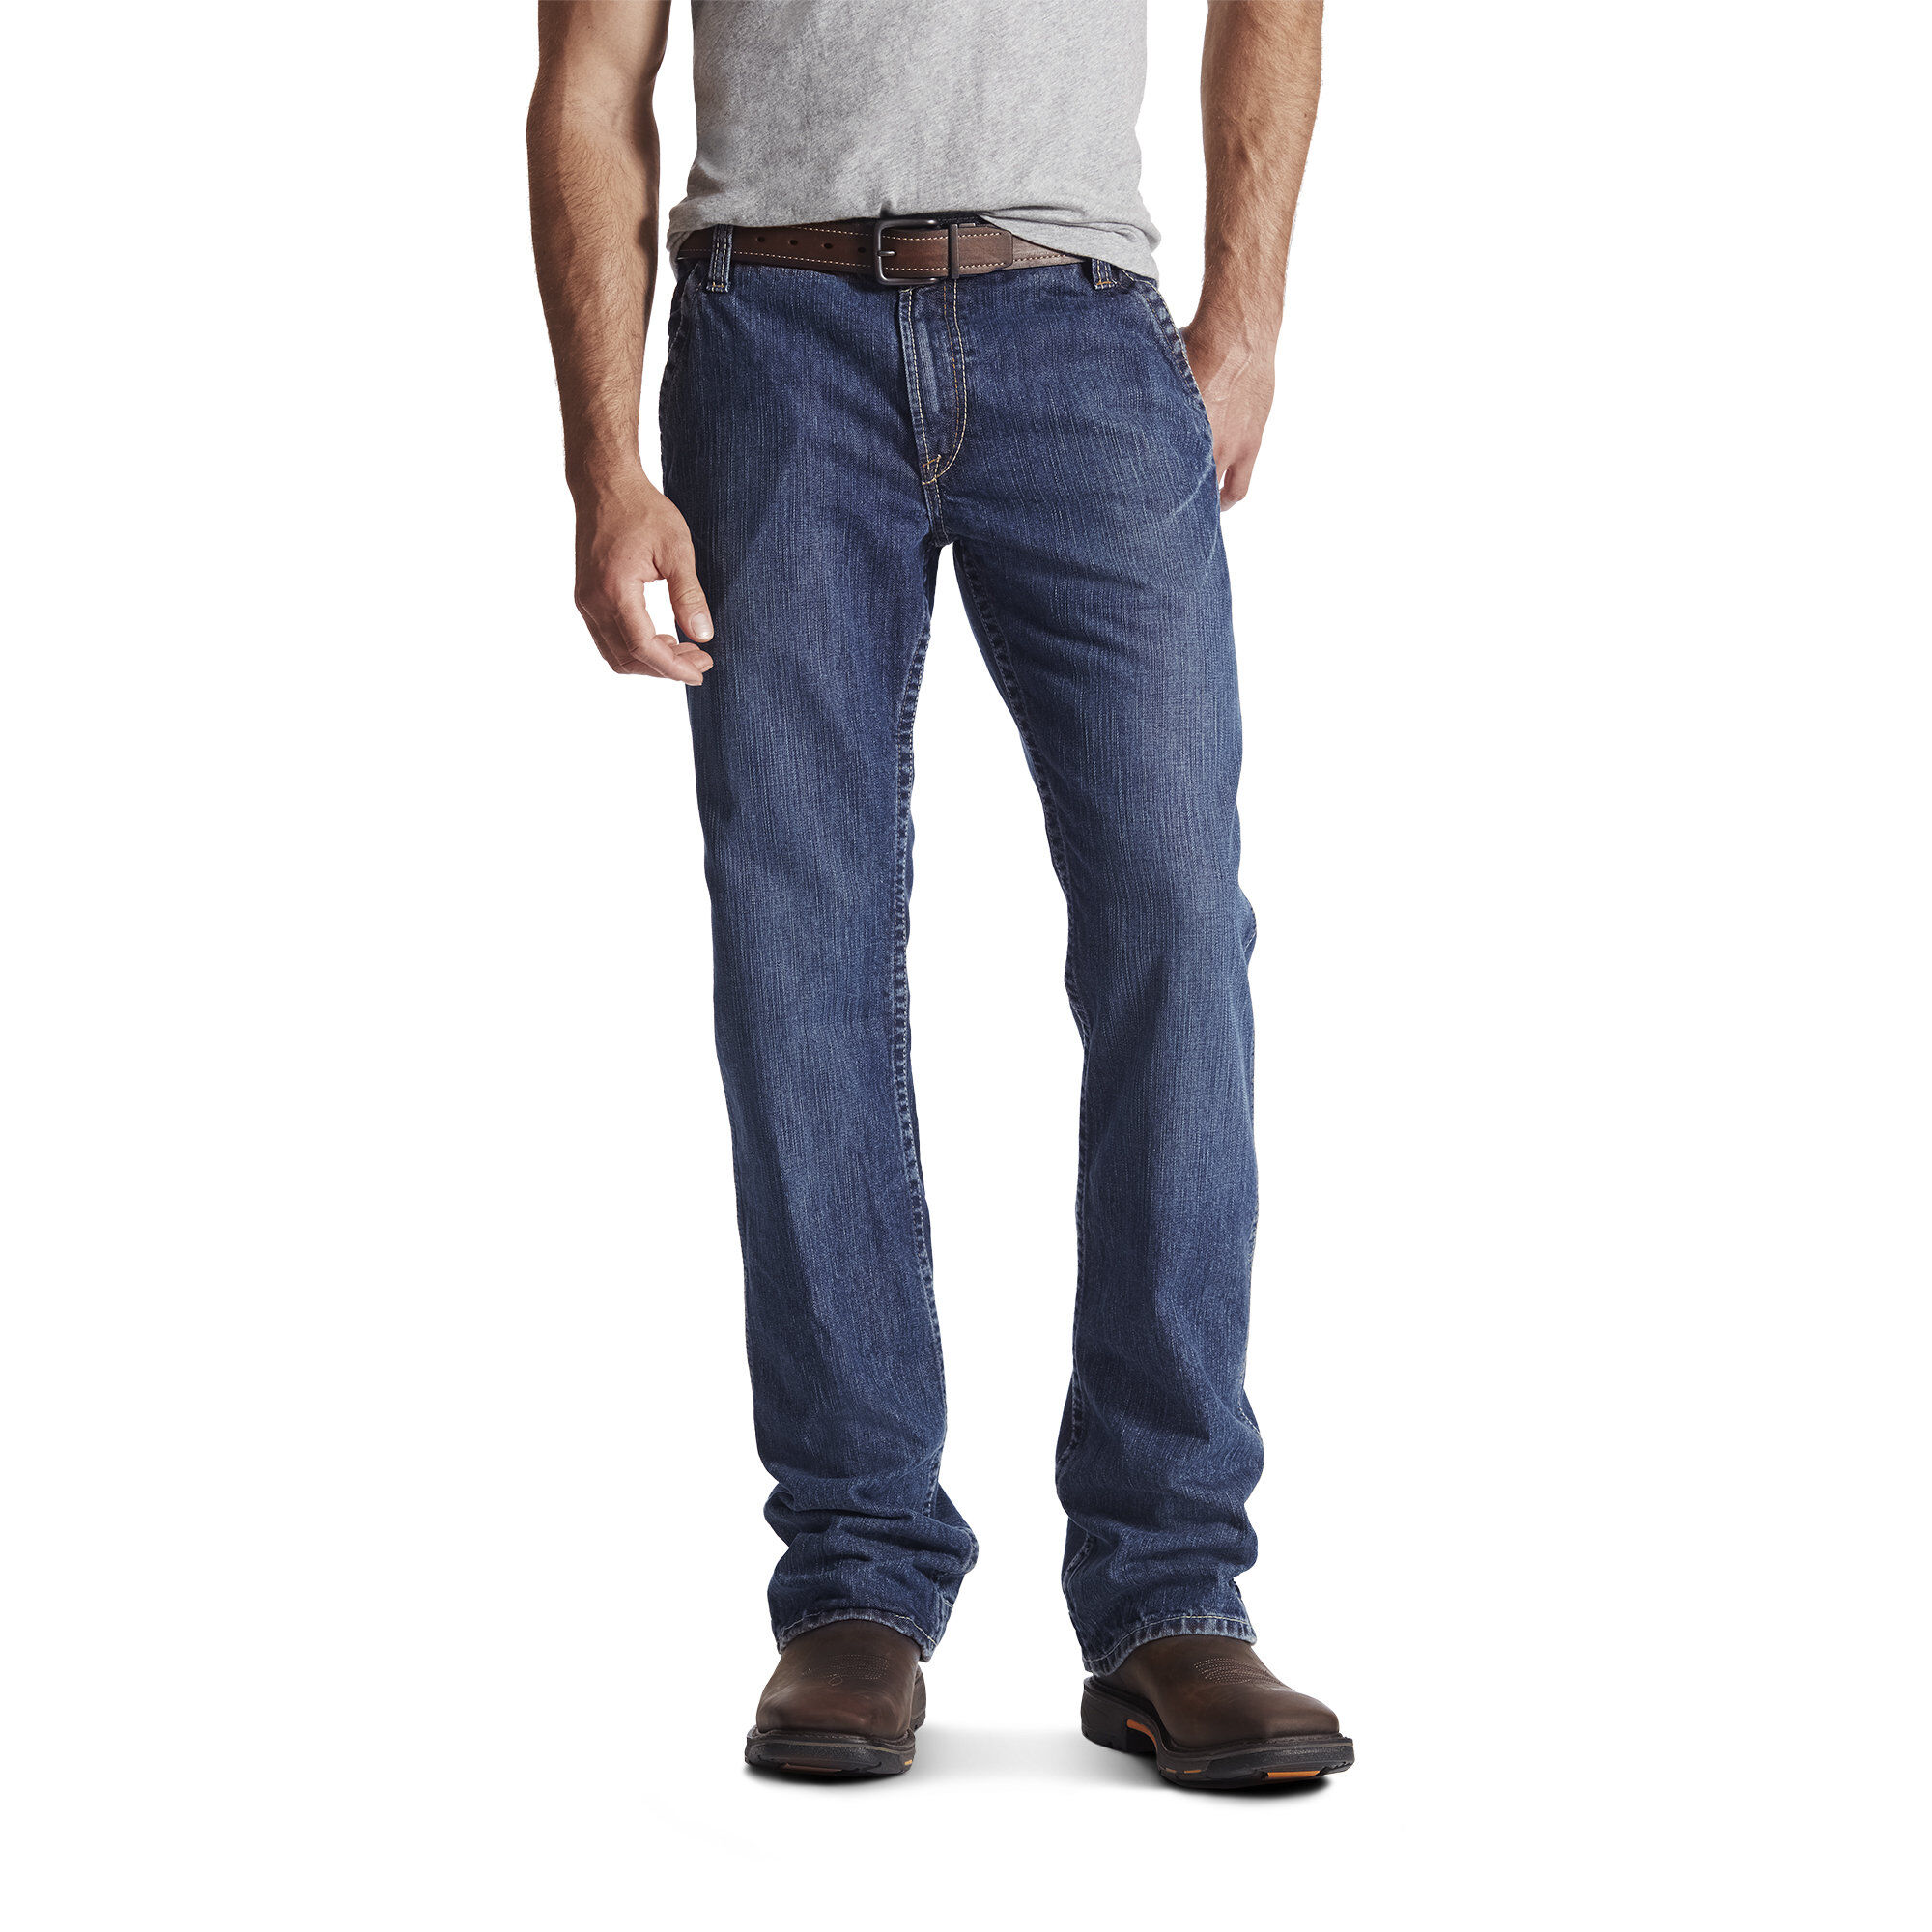 Ariat 10017262 M4 Low Rise Boot Cut Flame Resistant Jeans | Product ...